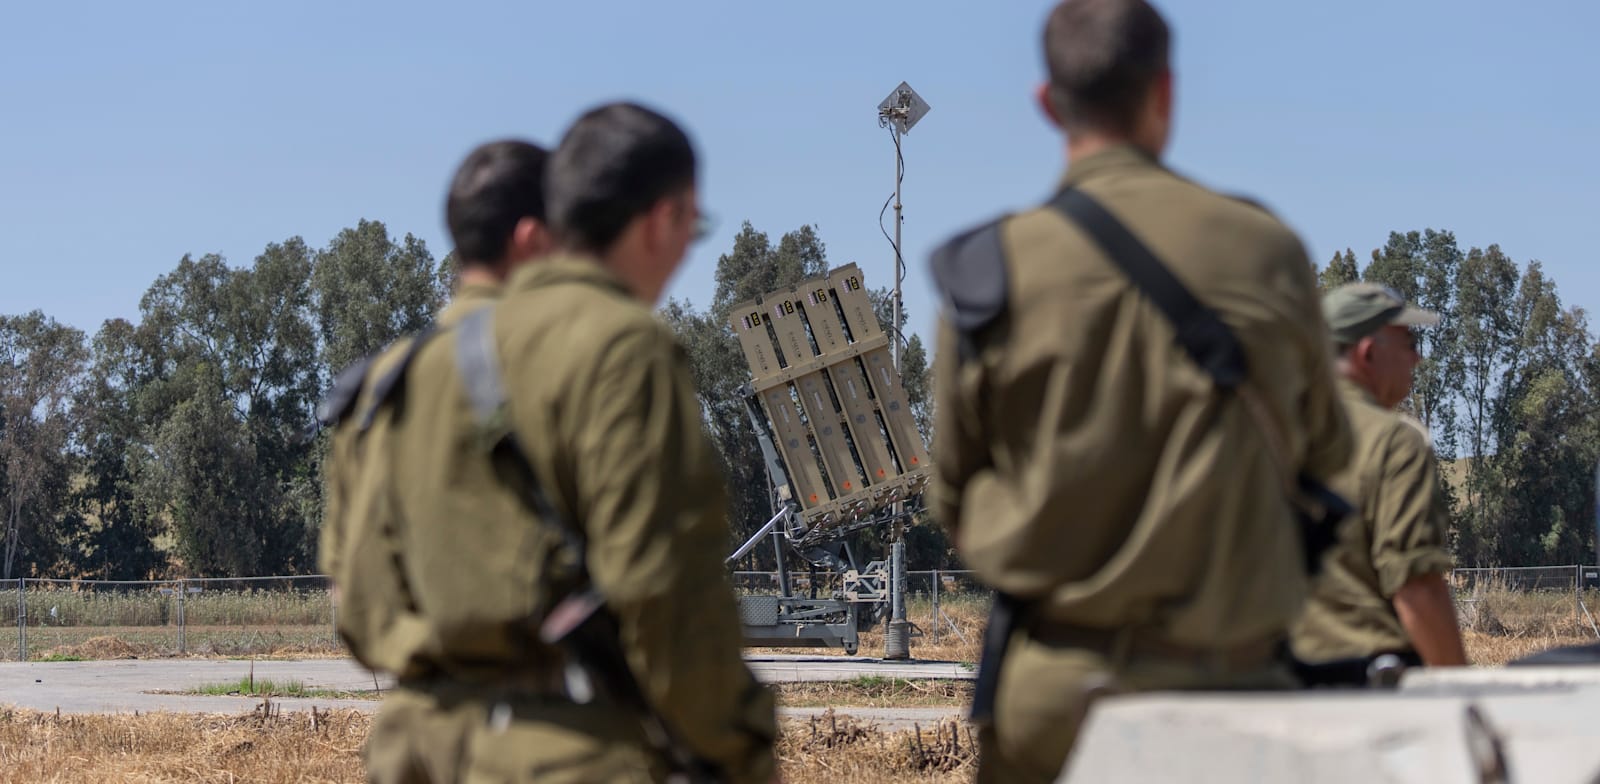 Denmark Opposes Buying Defense Systems from Israel Due to Gaza